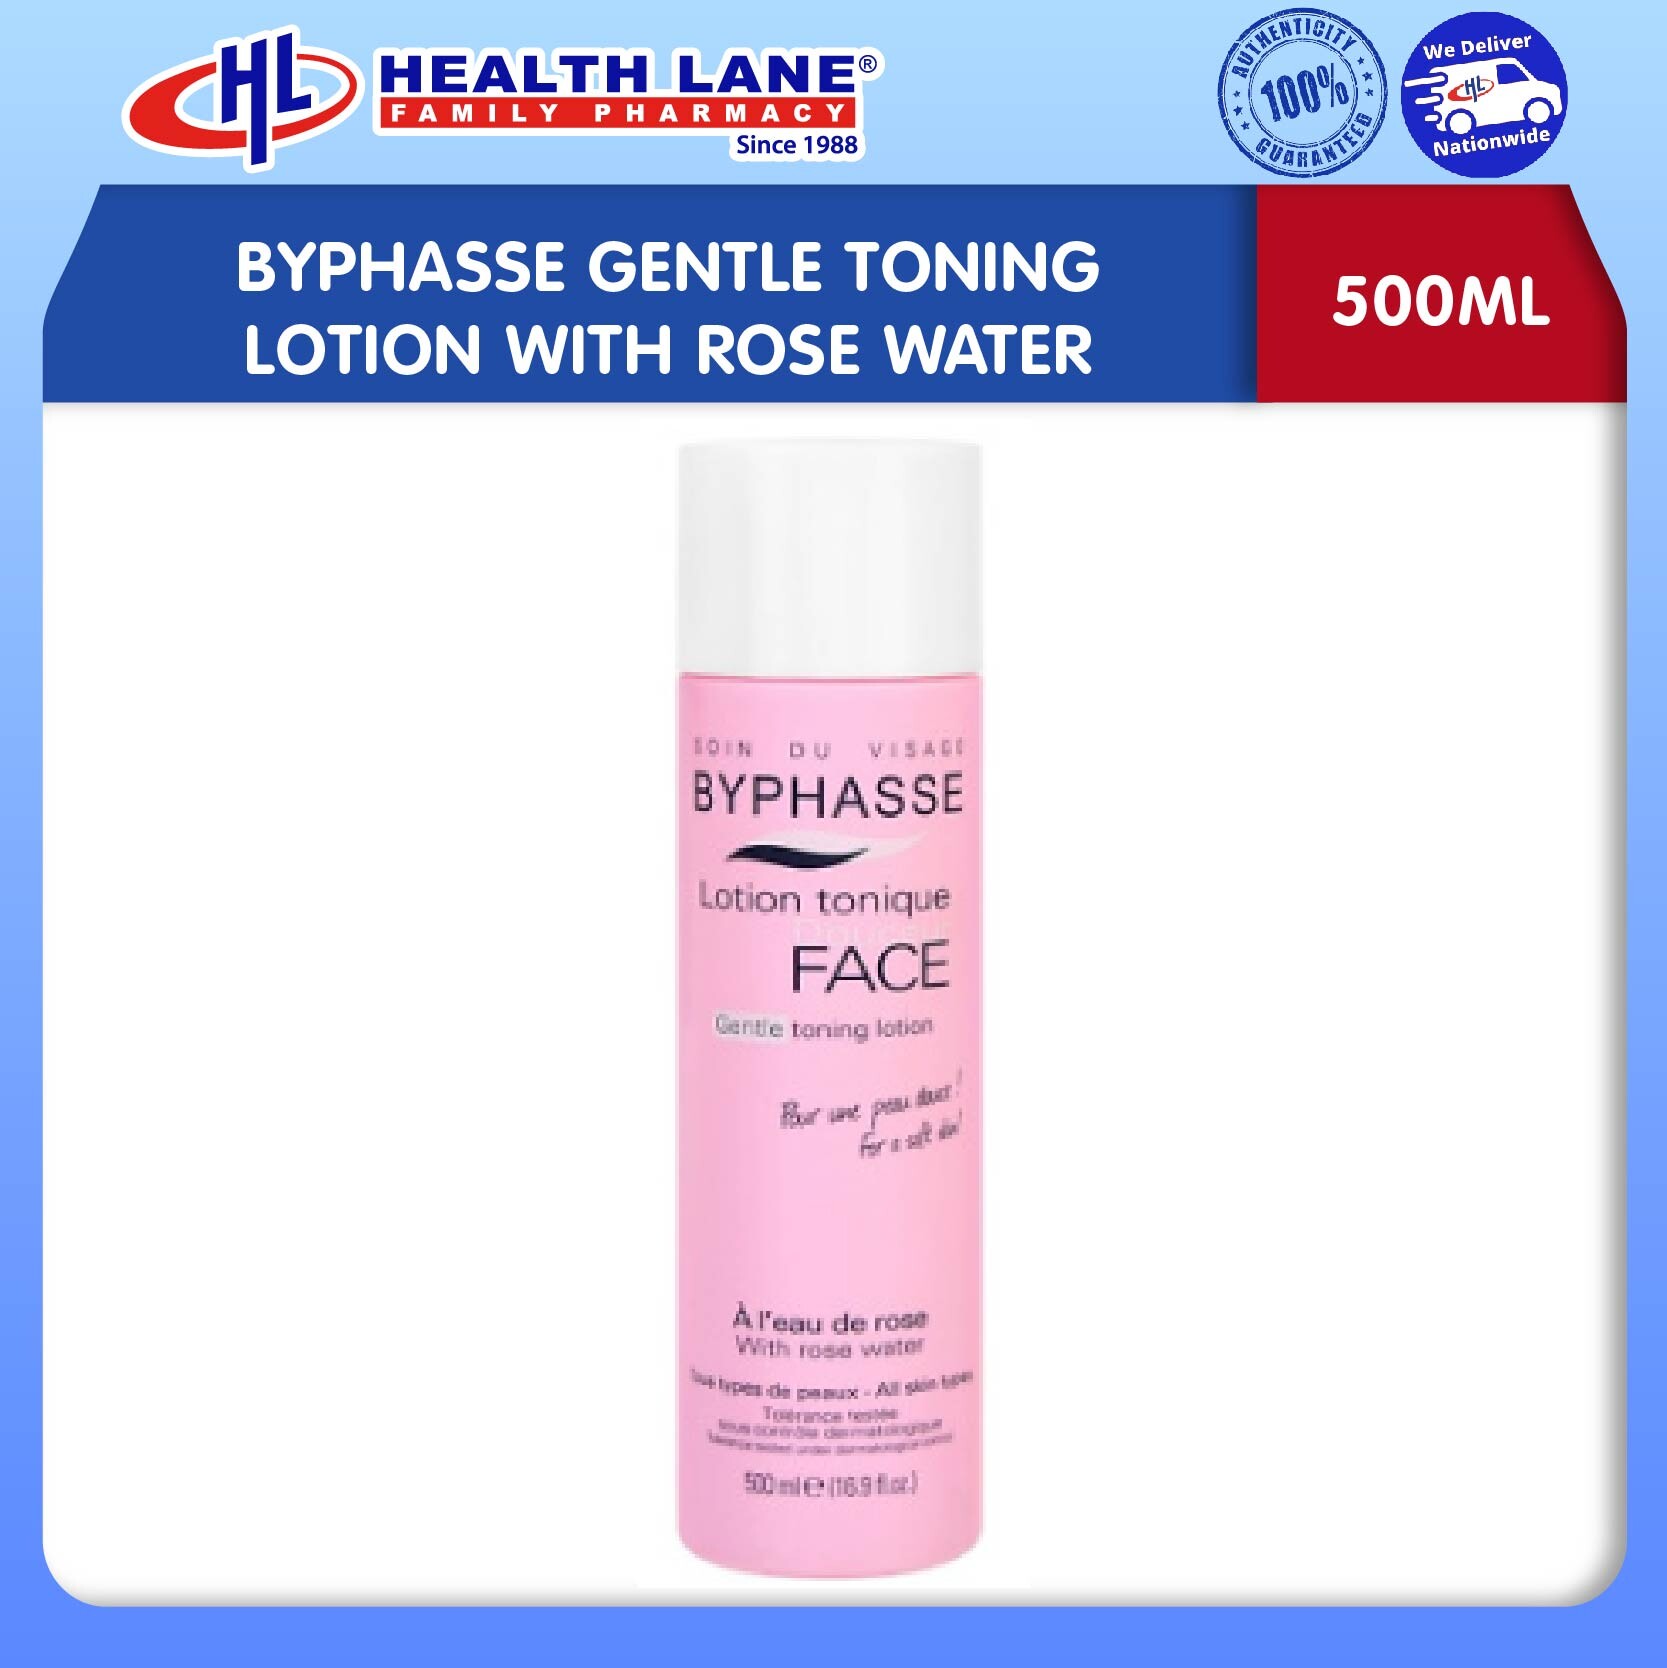 BYPHASSE GENTLE TONING LOTION WITH ROSE WATER (500ML)